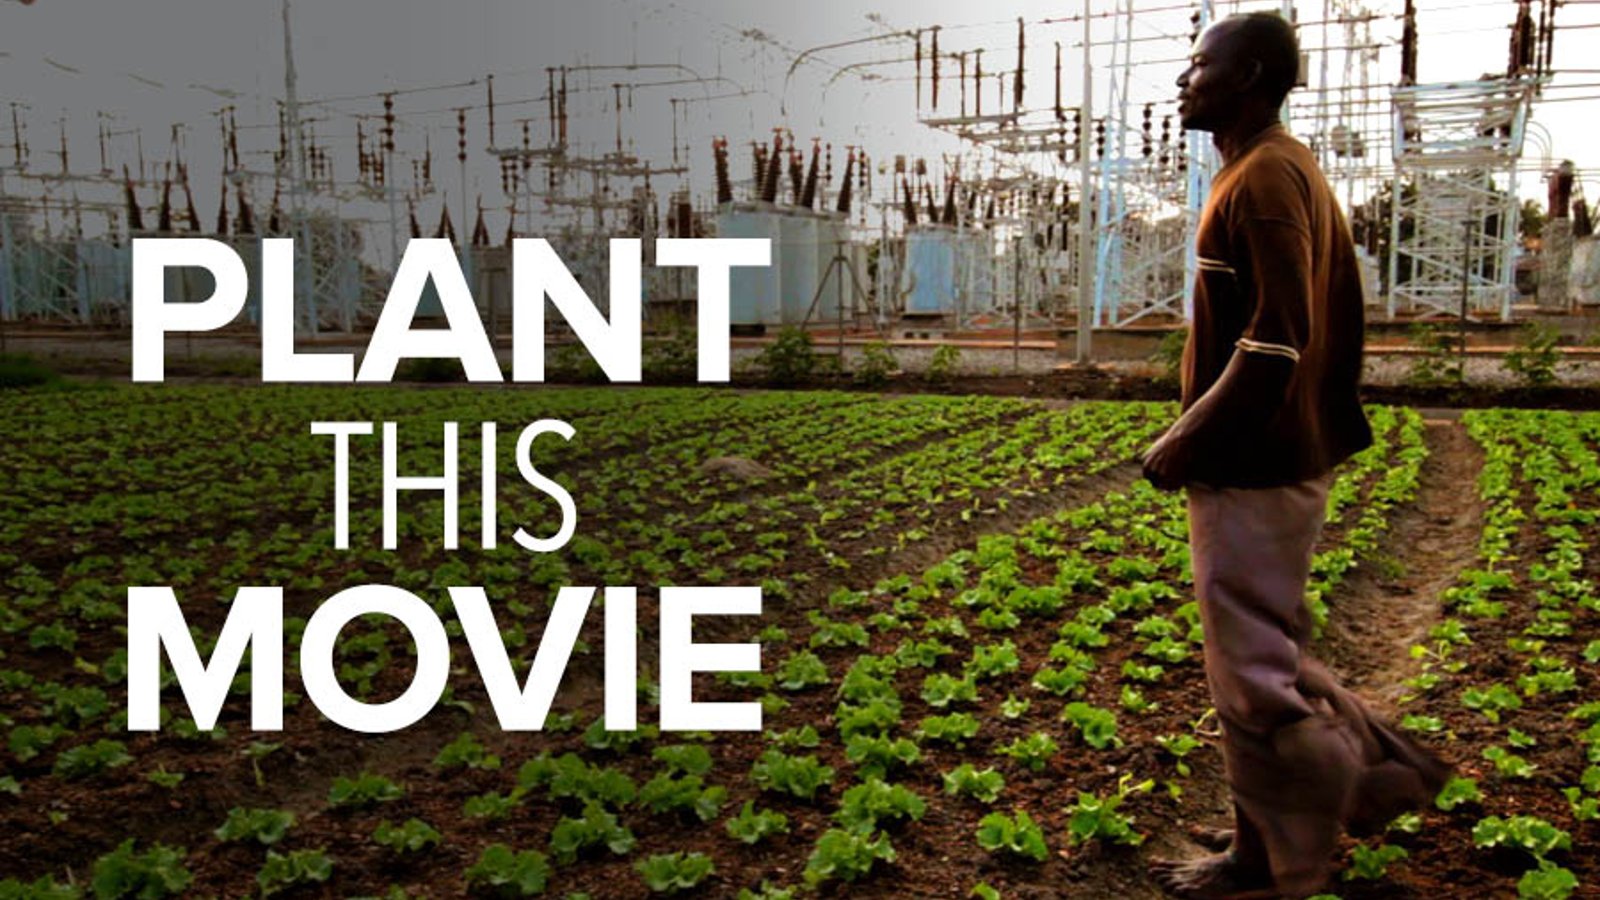 Plant This Movie - The Urban Agriculture Revolution